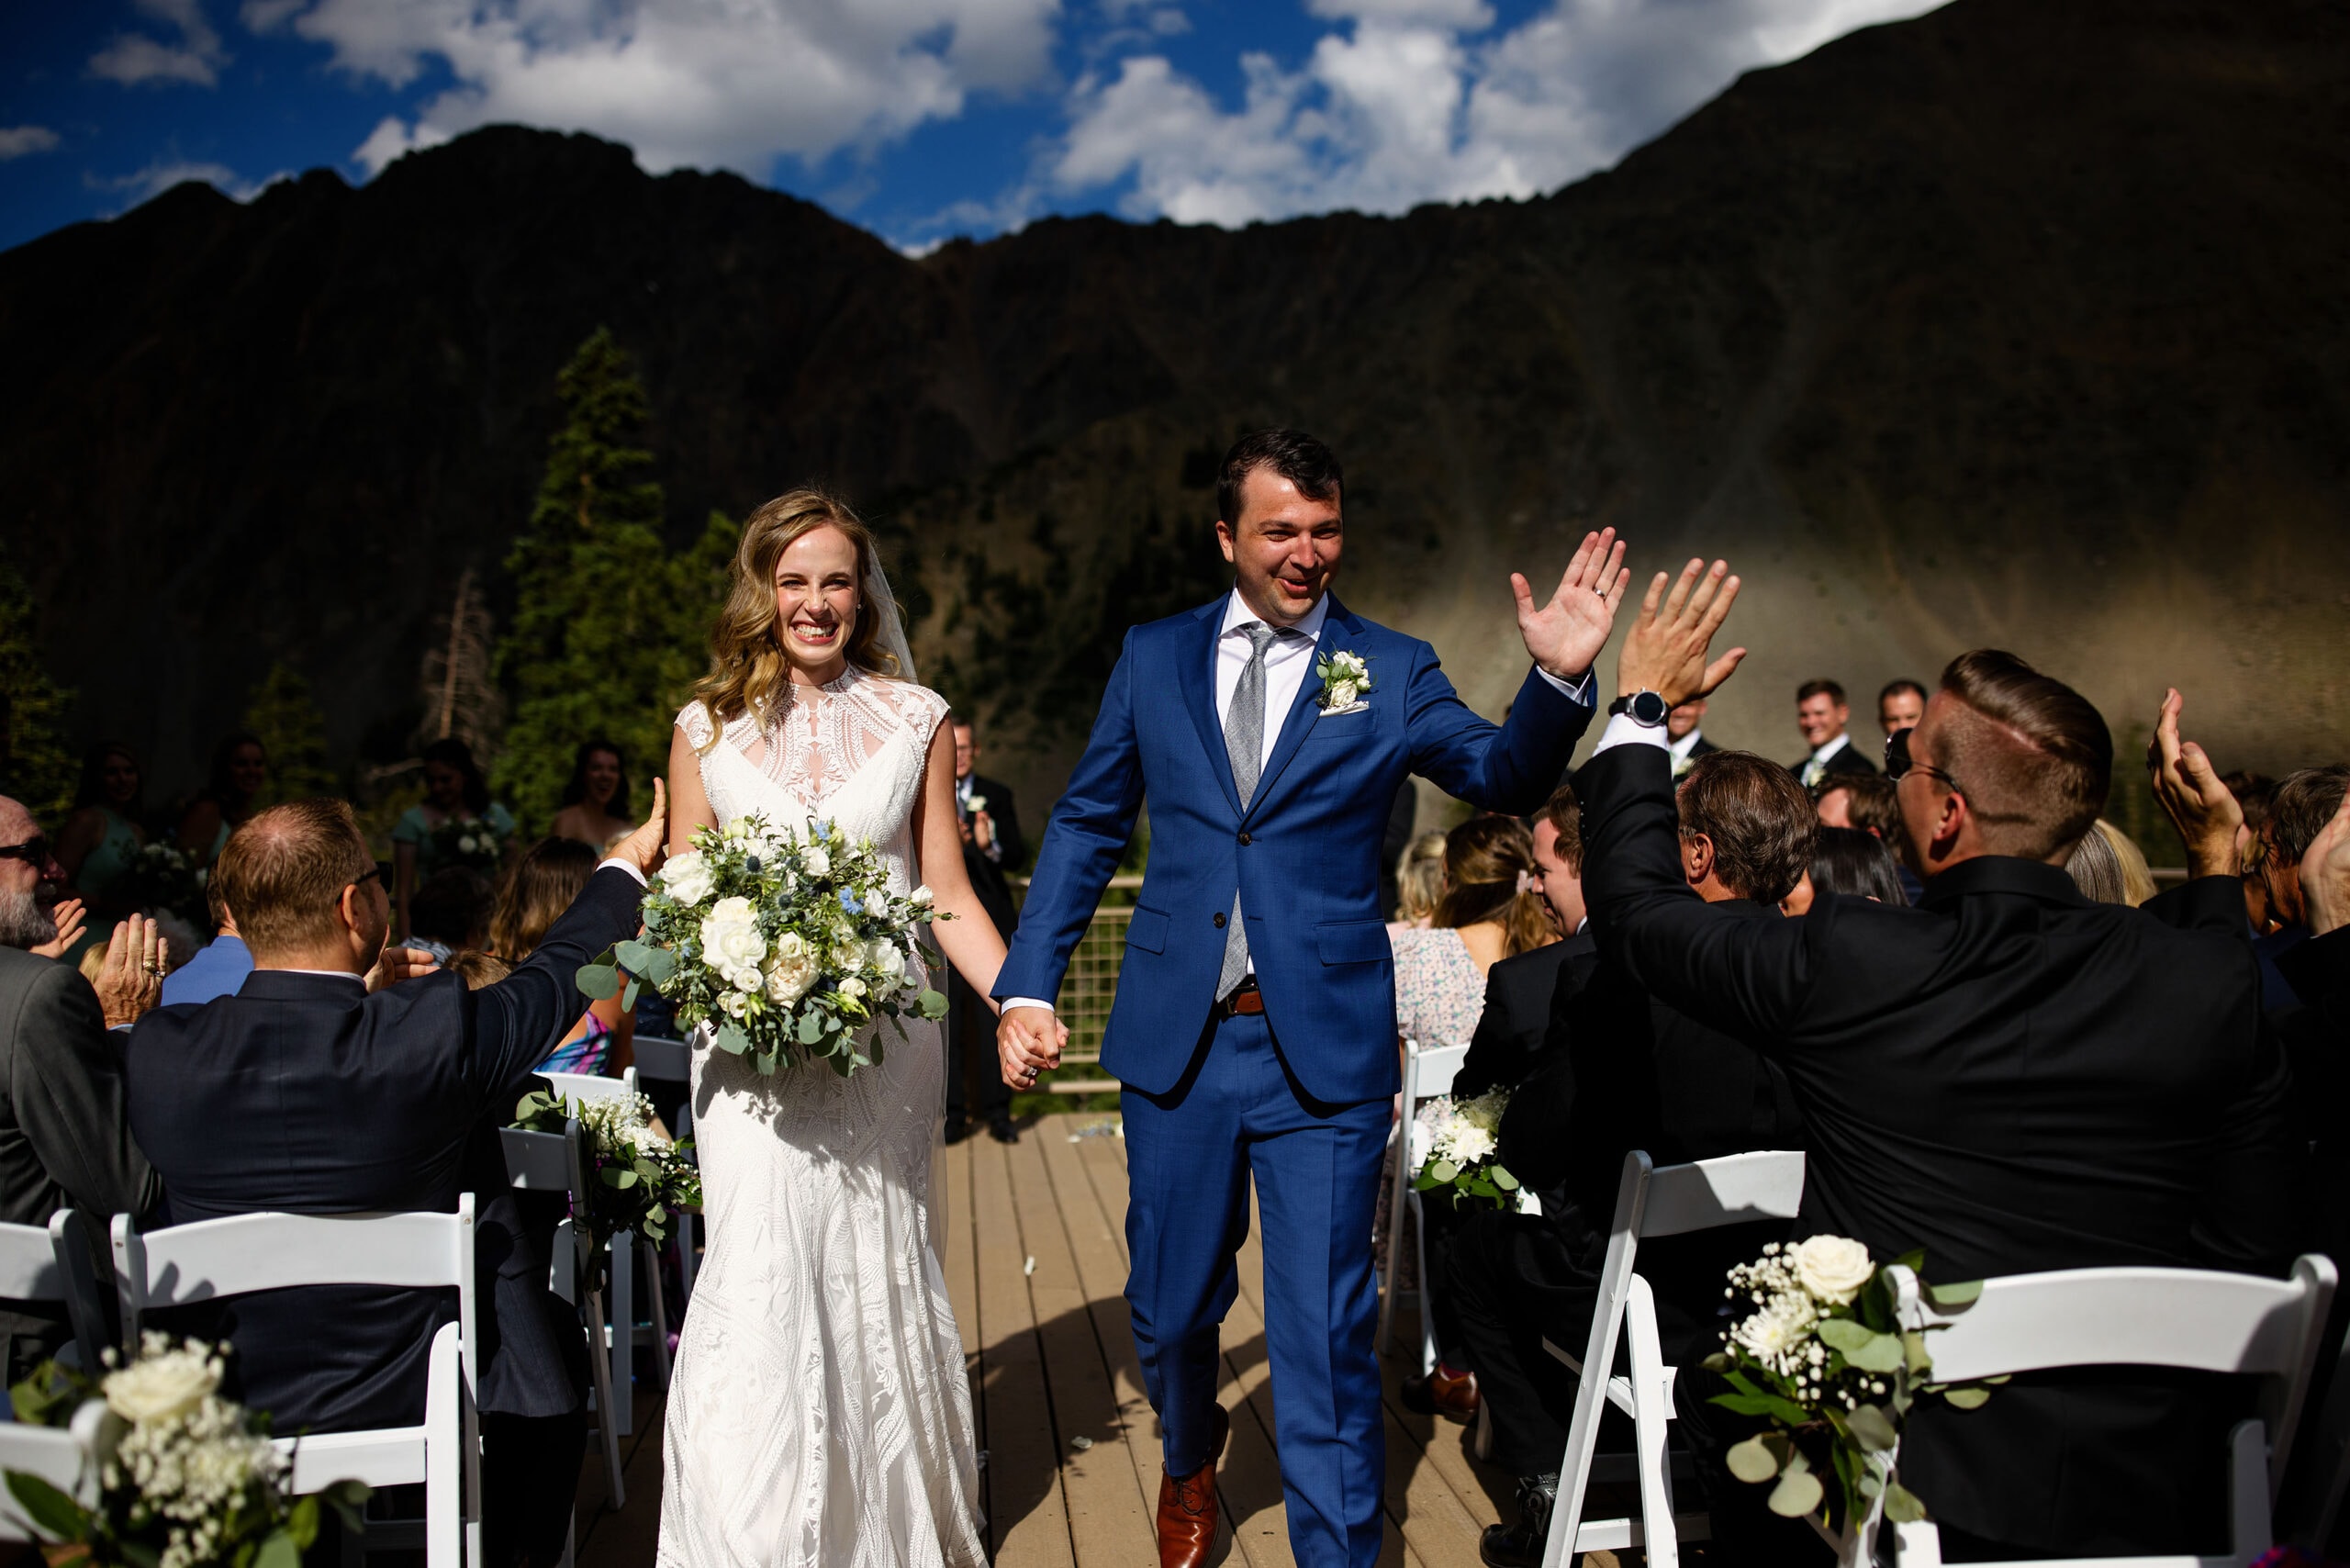 The groom gets a high five as he walks down the aisle with his bride after the ceremony at Black Mountain Lodge